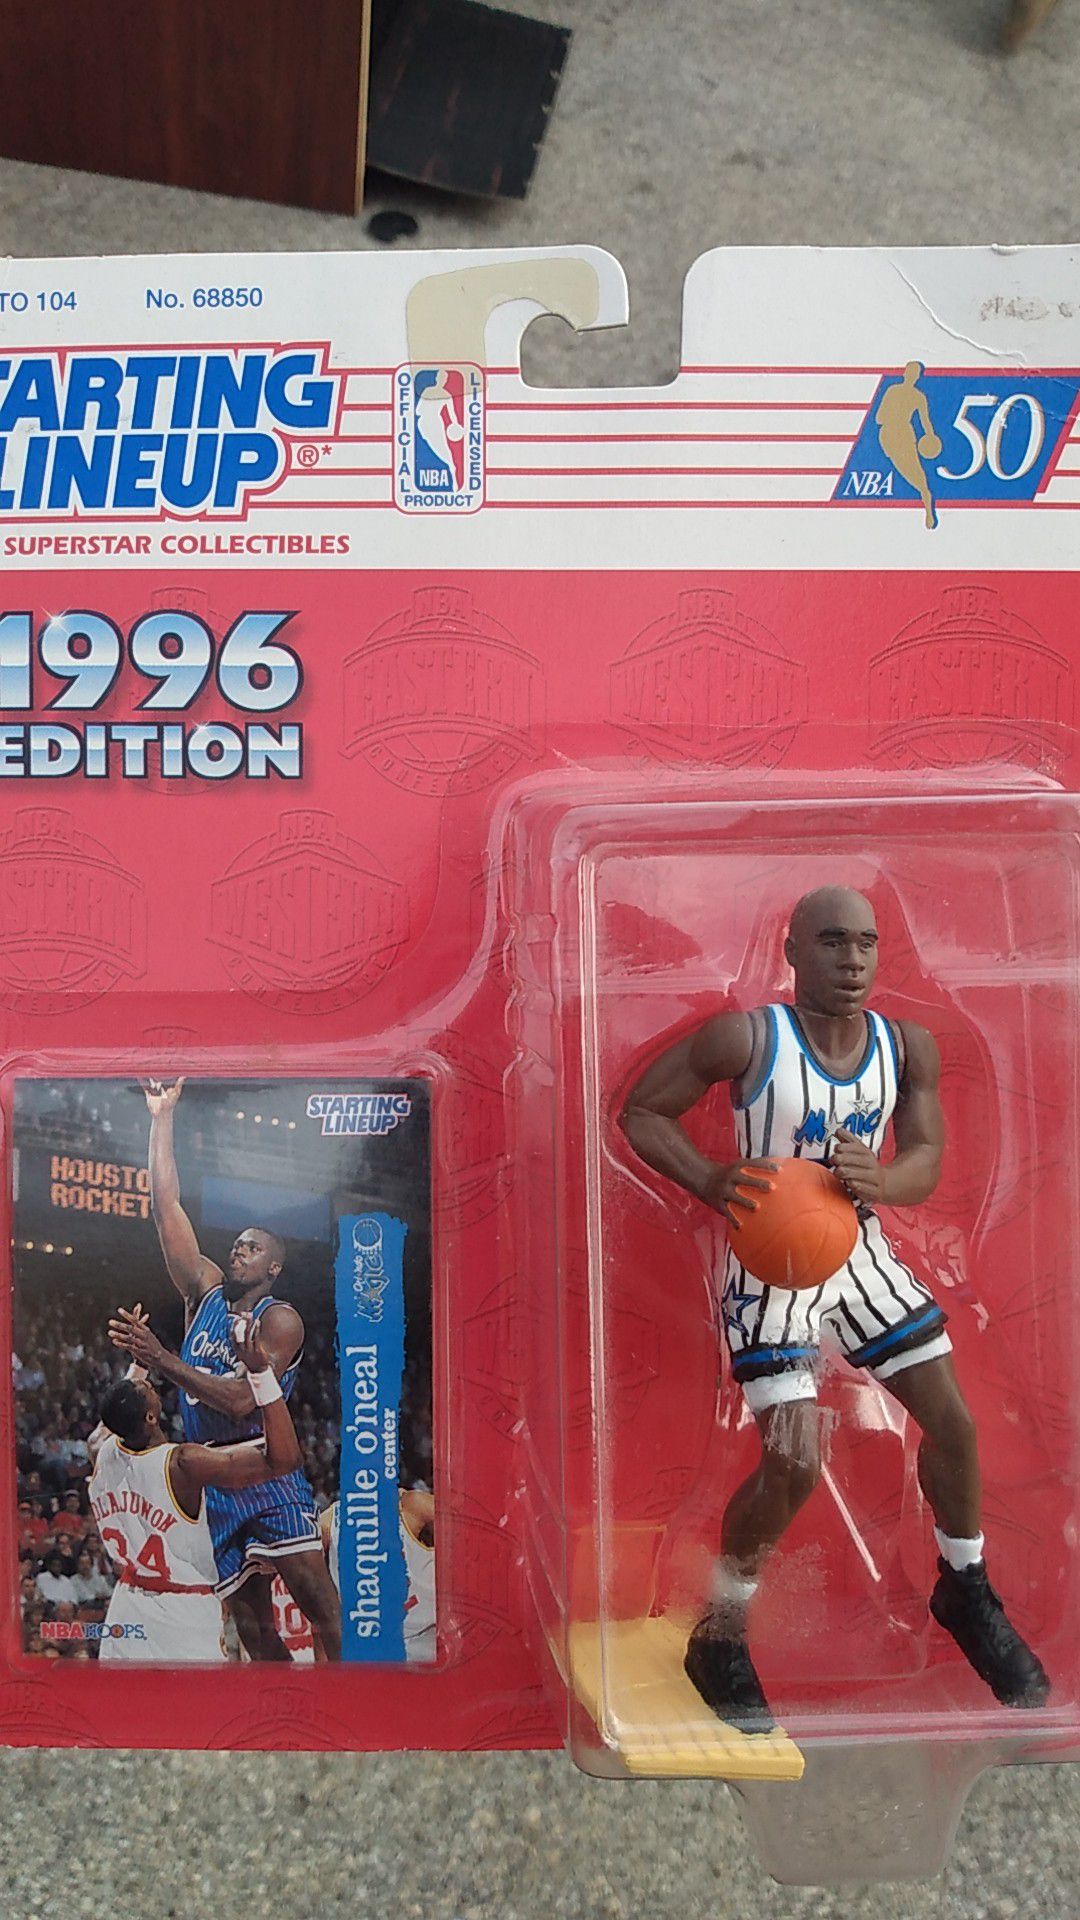 Starting lineup NBA 50 1996 edition number 68850 Shaquille O'Neal Superstar collectible